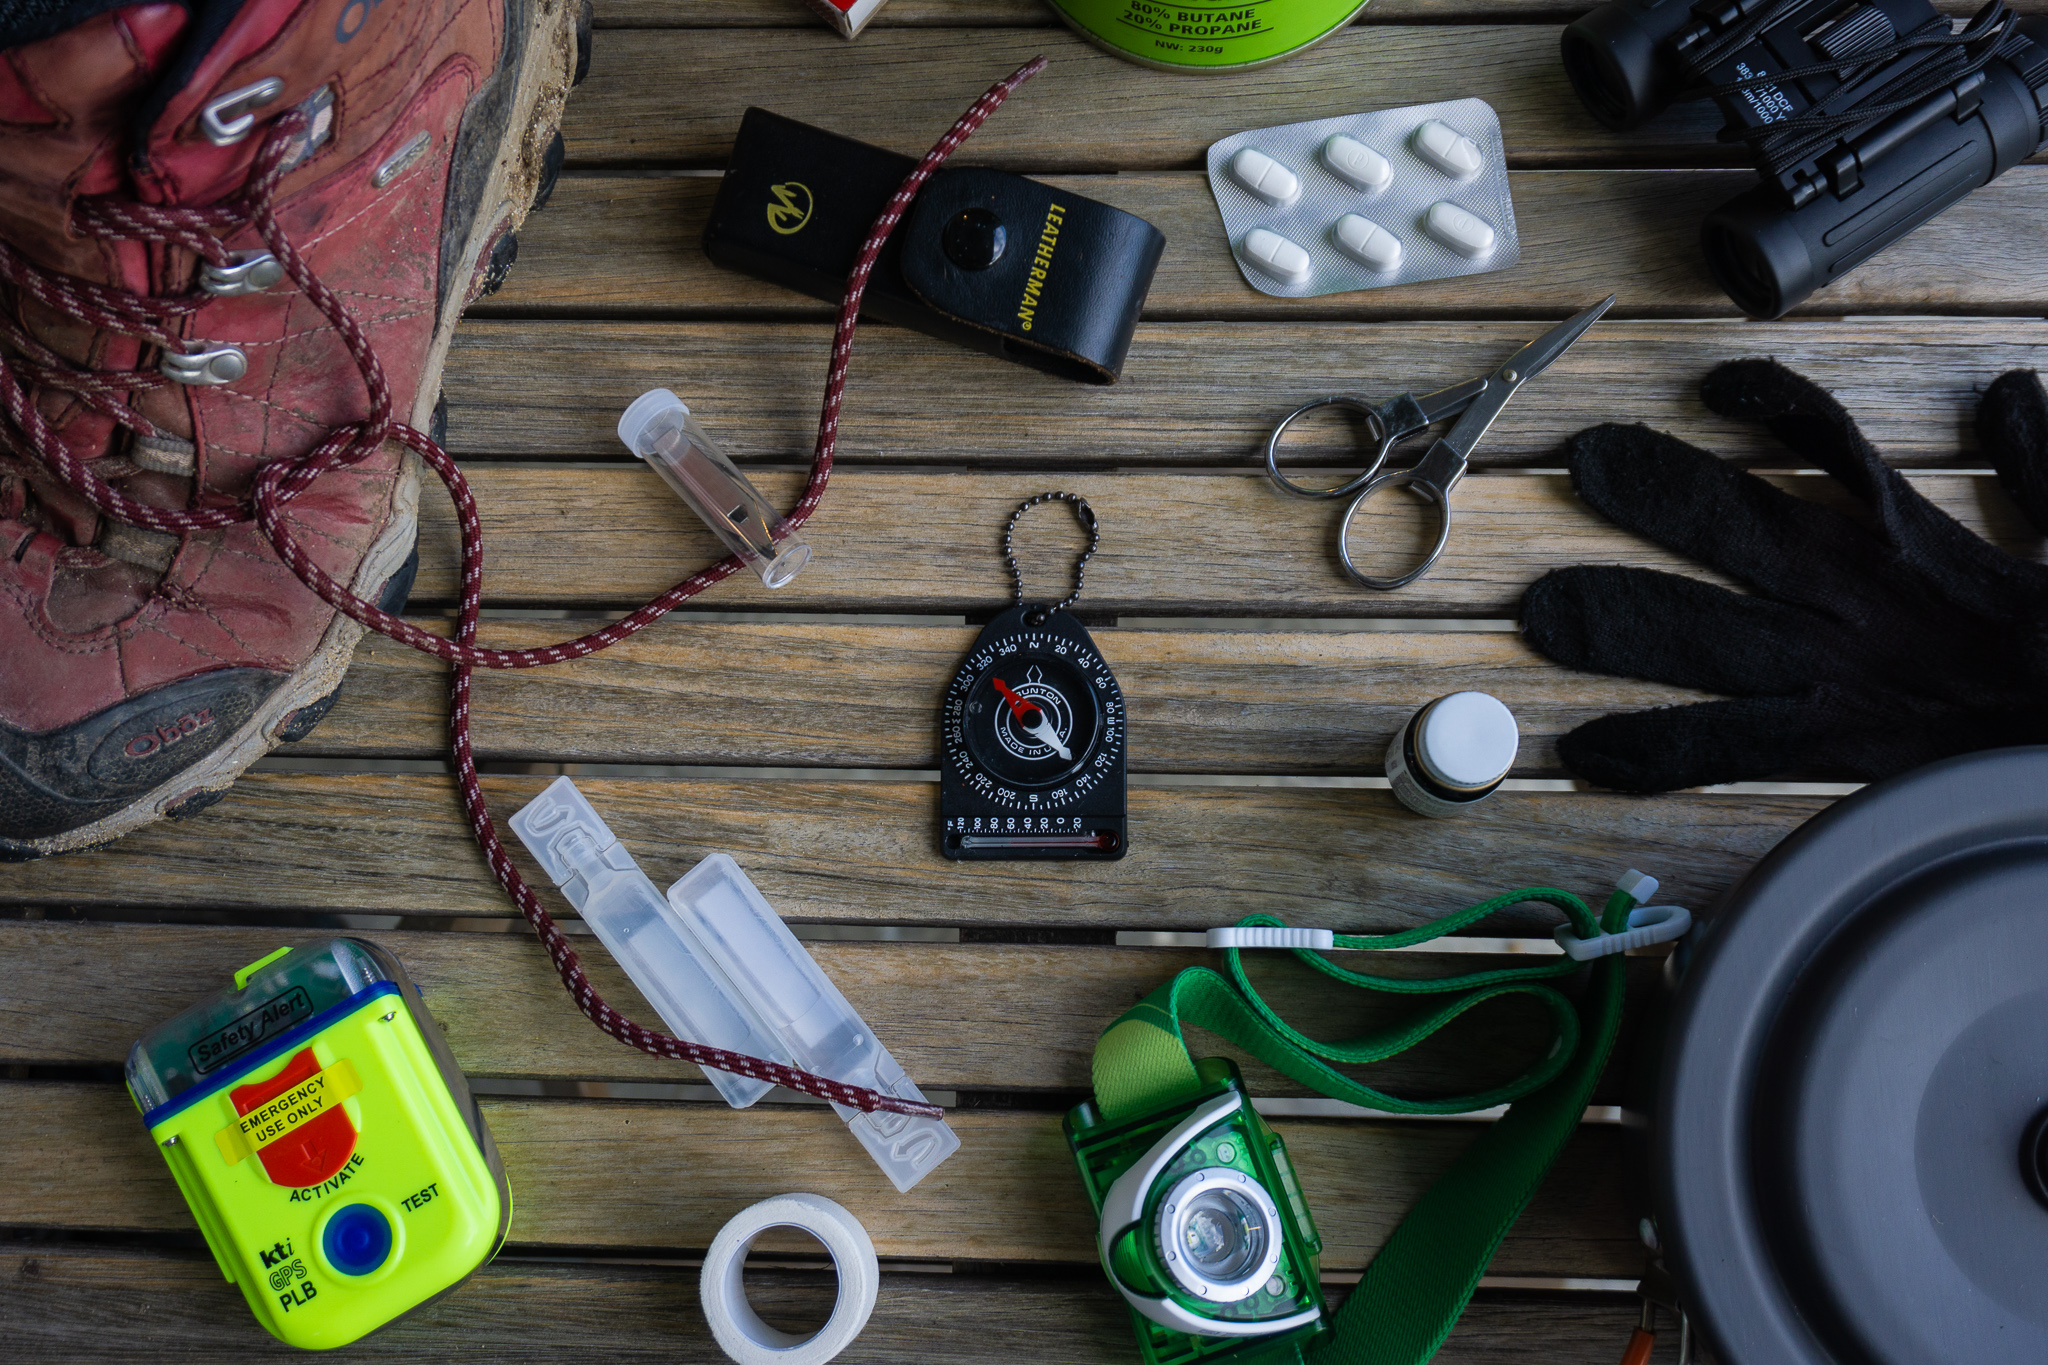 Flatlay of tramping / hiking gear with a compass in the middle, and boots, gloves, headlight, scissors, PLB, etc surrounding it